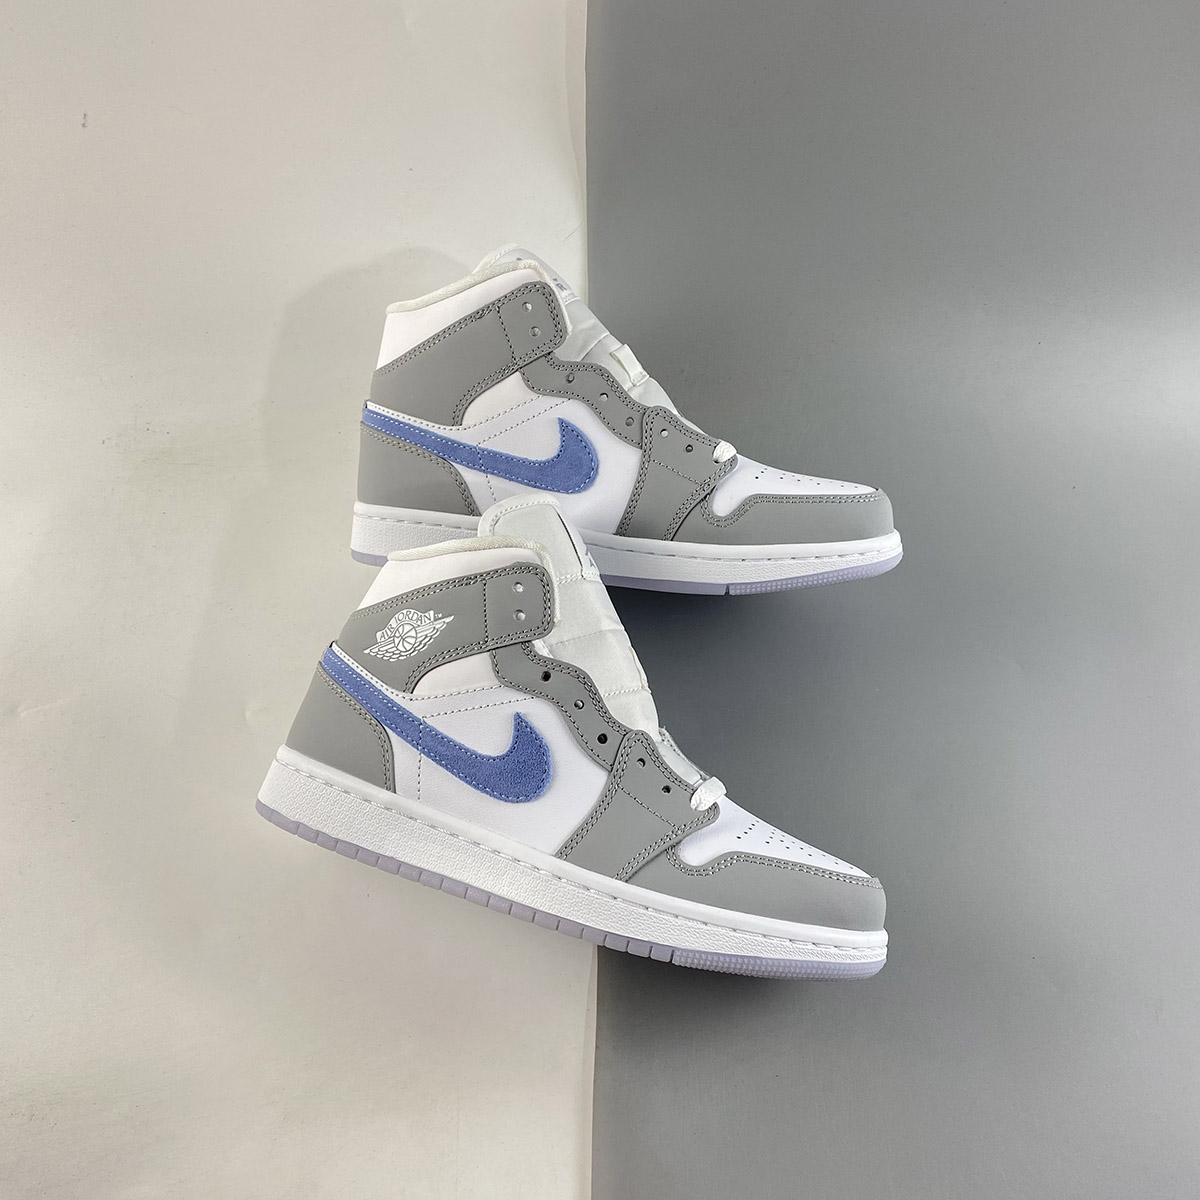 Air Jordan 1 Mid White Grey Blue For Sale – The Sole Line